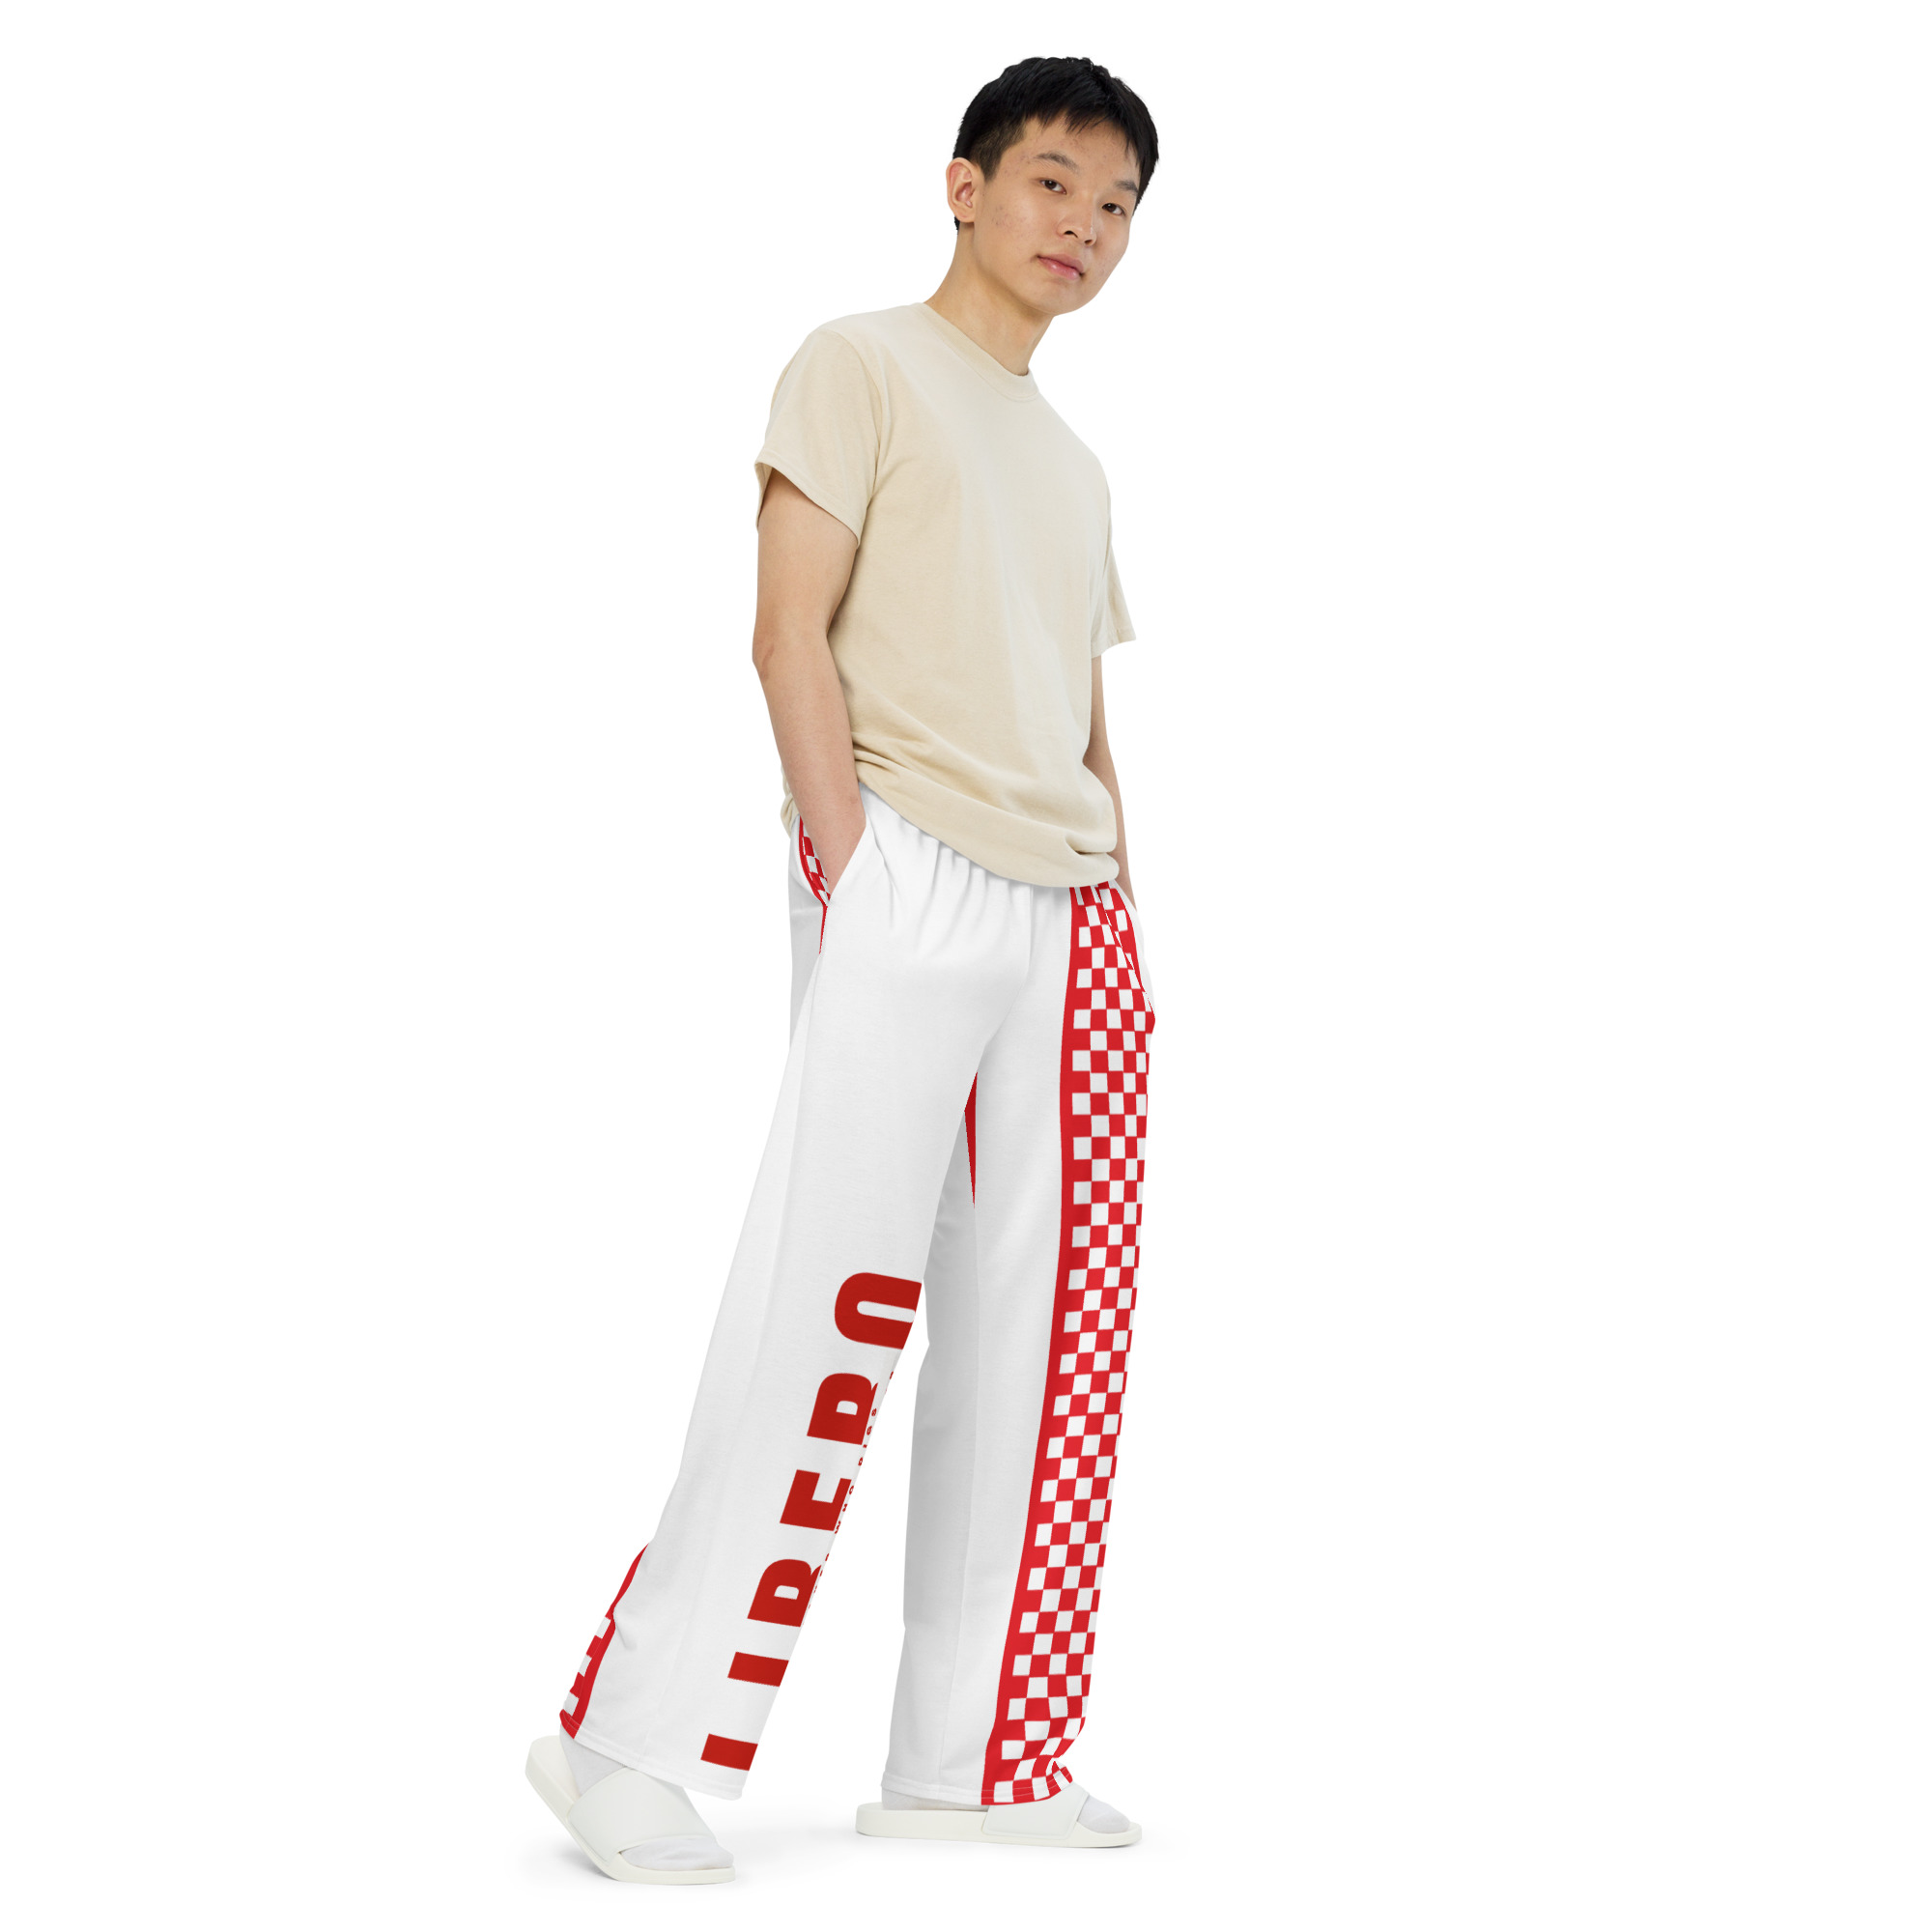 Plus, these wide leg pajama pants aren't just stylish, they're also versatile!

You can use them as beach volleyball cover-up pants or even as yoga pants or like I do as workout pants.